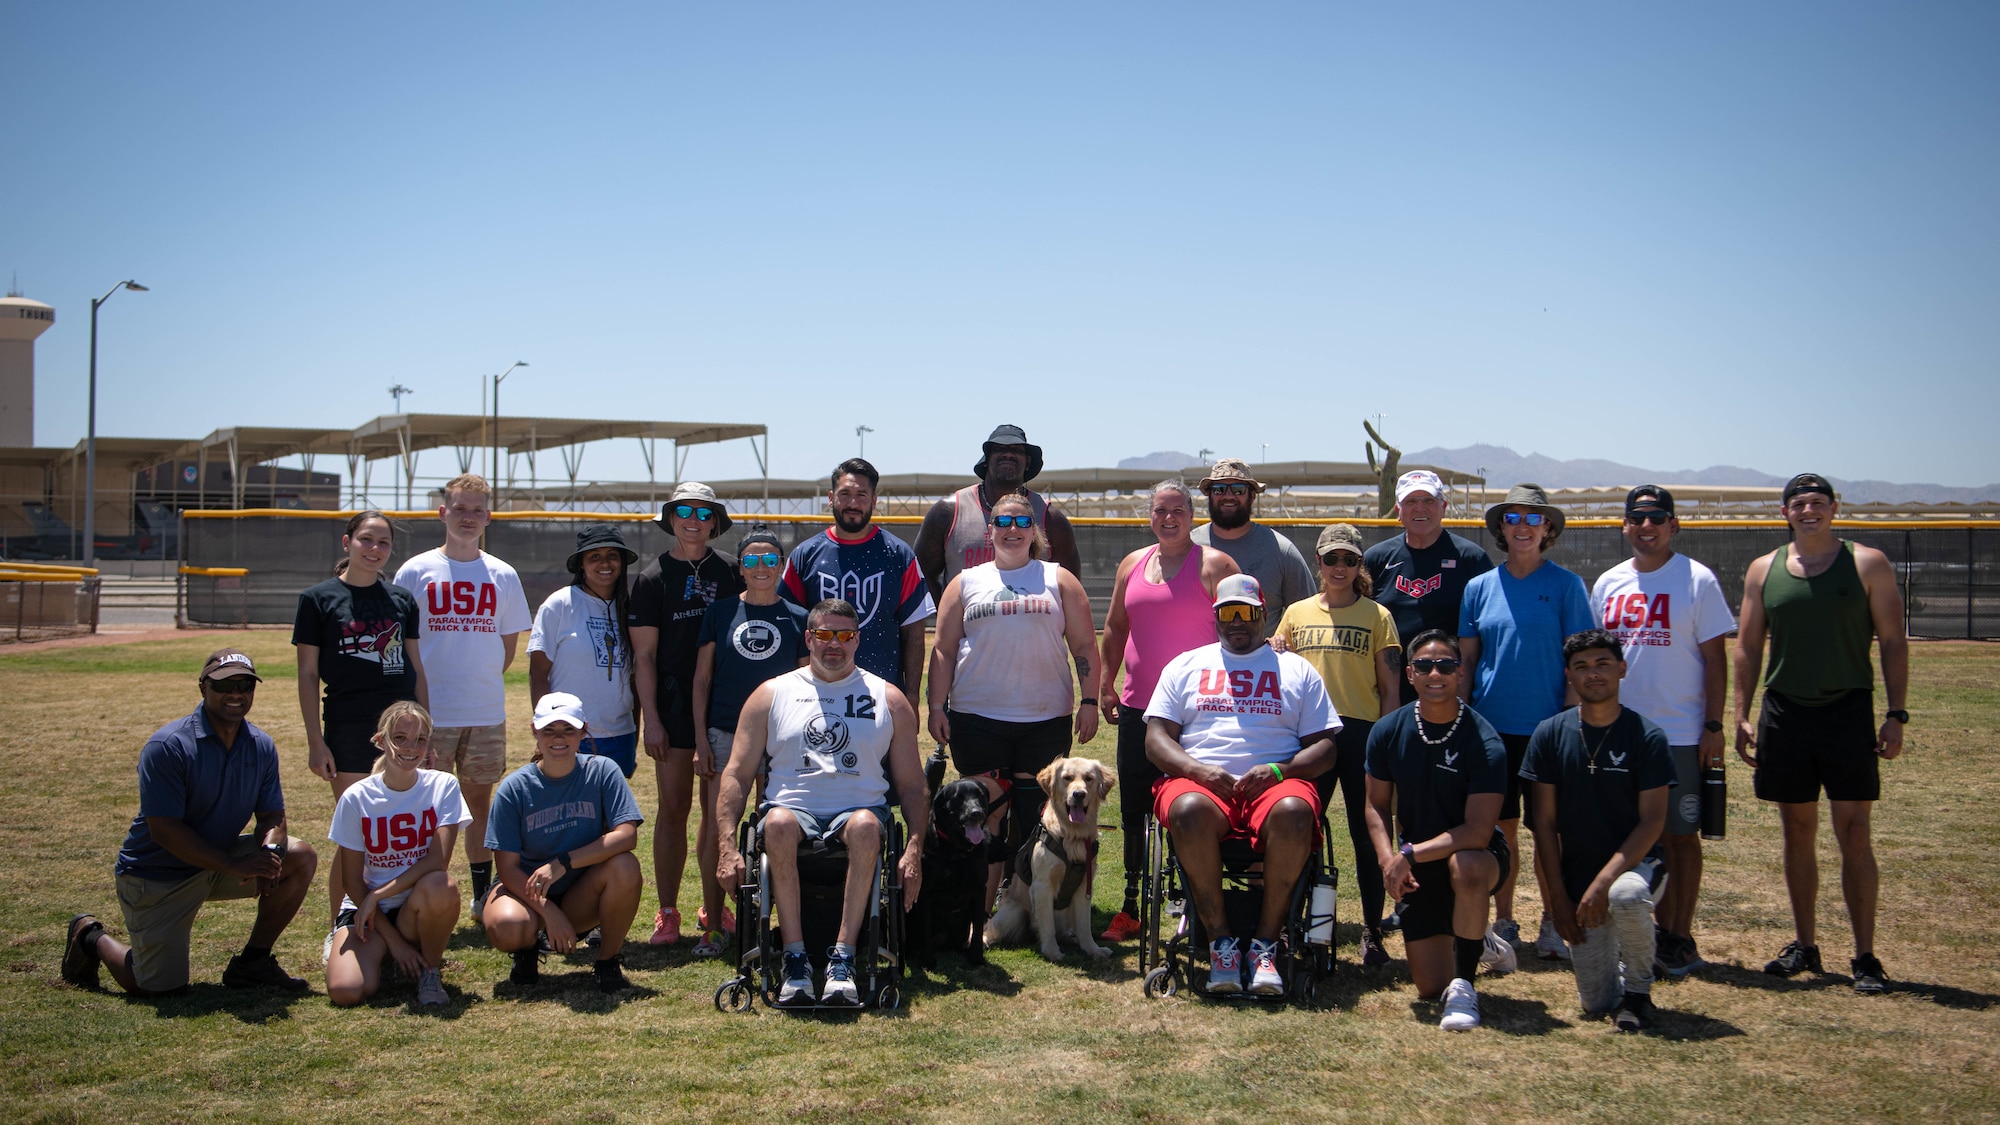 Participants, trainers and coaches of the annual paralympic Desert Challenge Track and Field Training Camp pose for a group photo May 27, 2021, at Luke Air Force Base, Arizona.